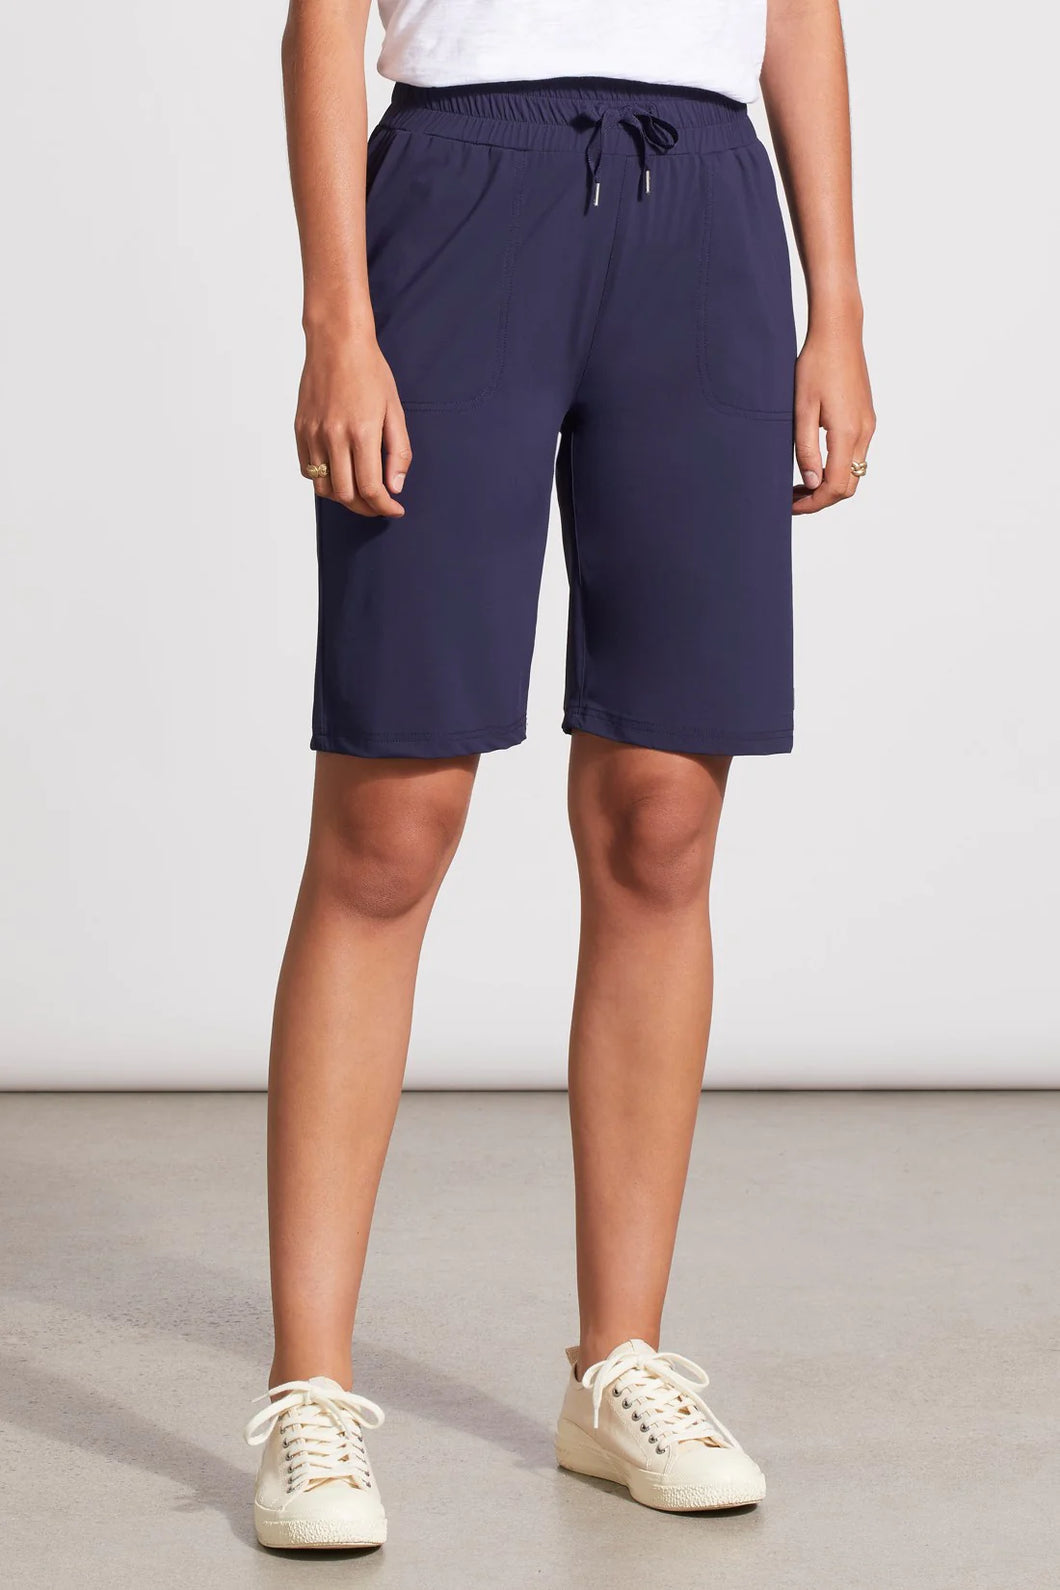 T Four Way Stretch Shorts with tie: Navy or Black, Powell River, BC